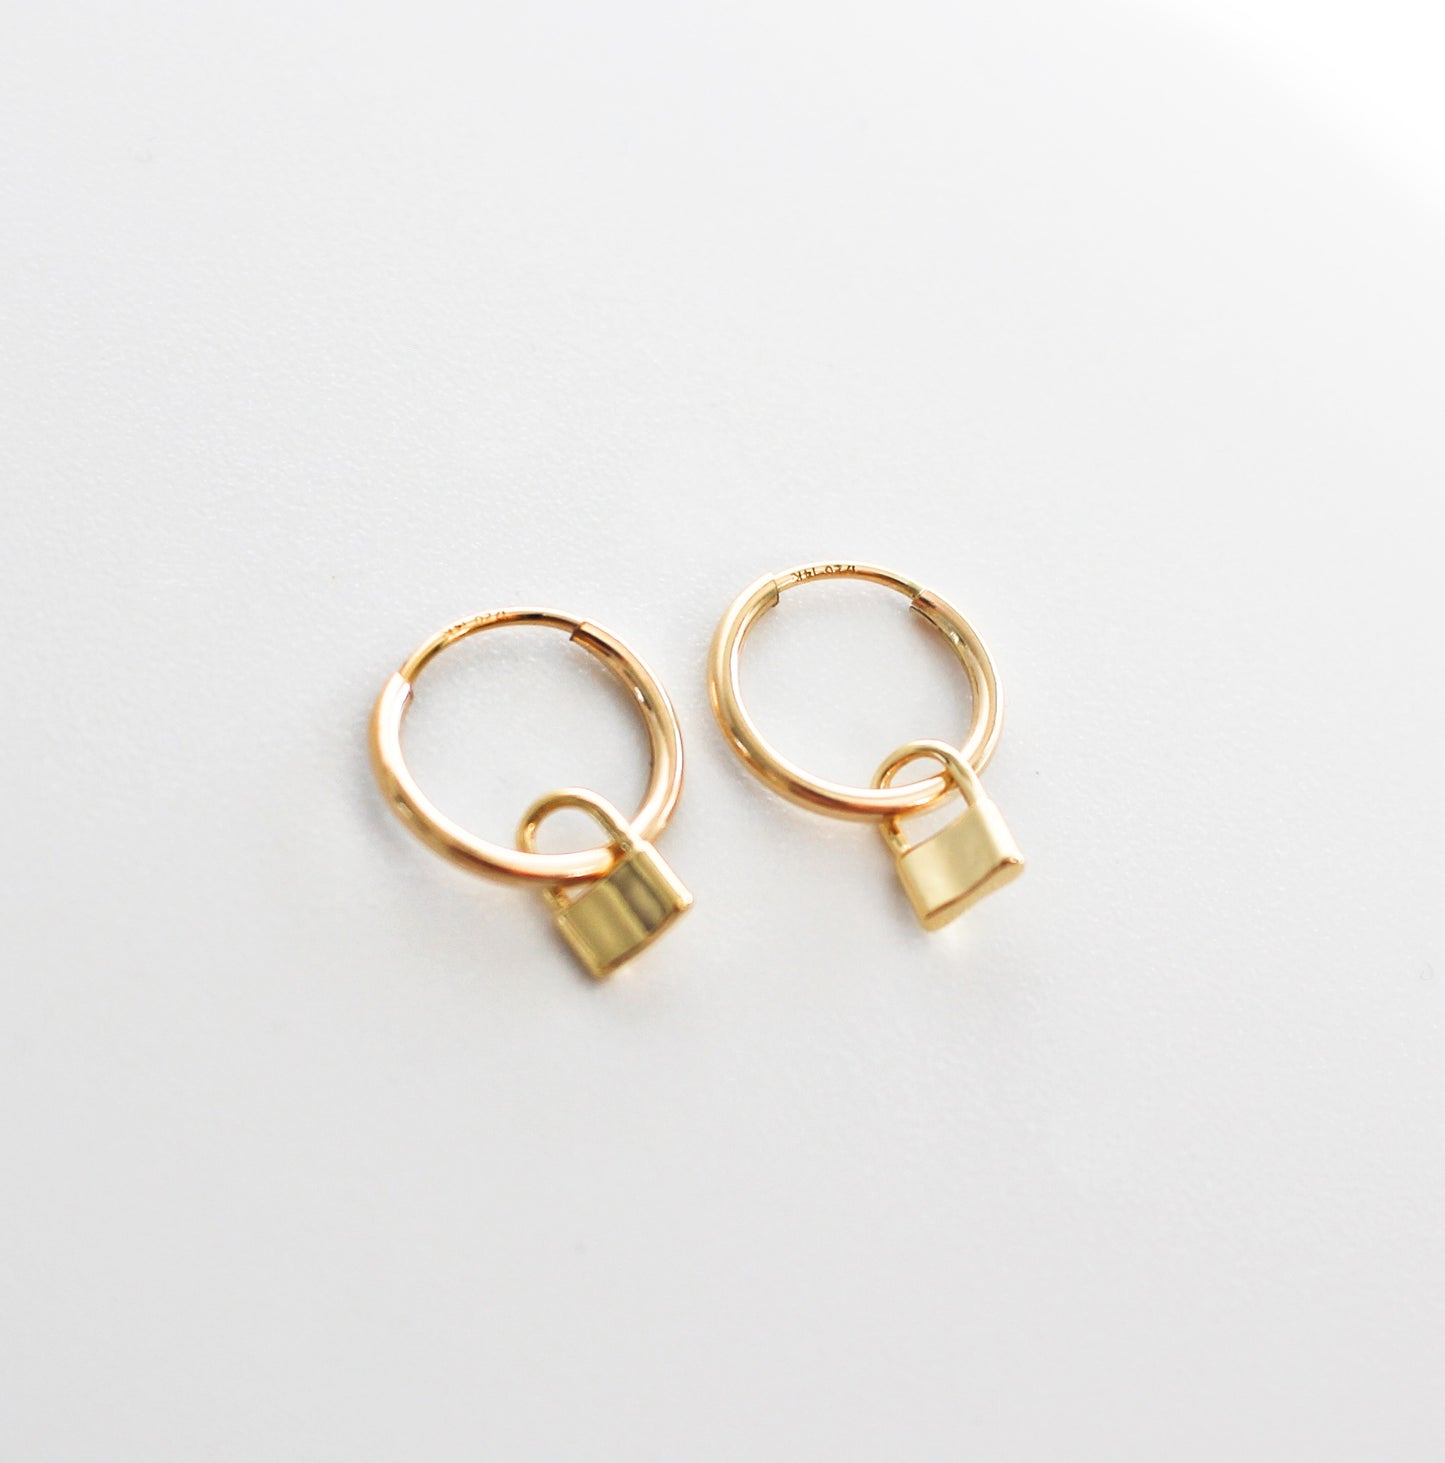 Tina - Removable Gold Filled Padlock hoop earrings